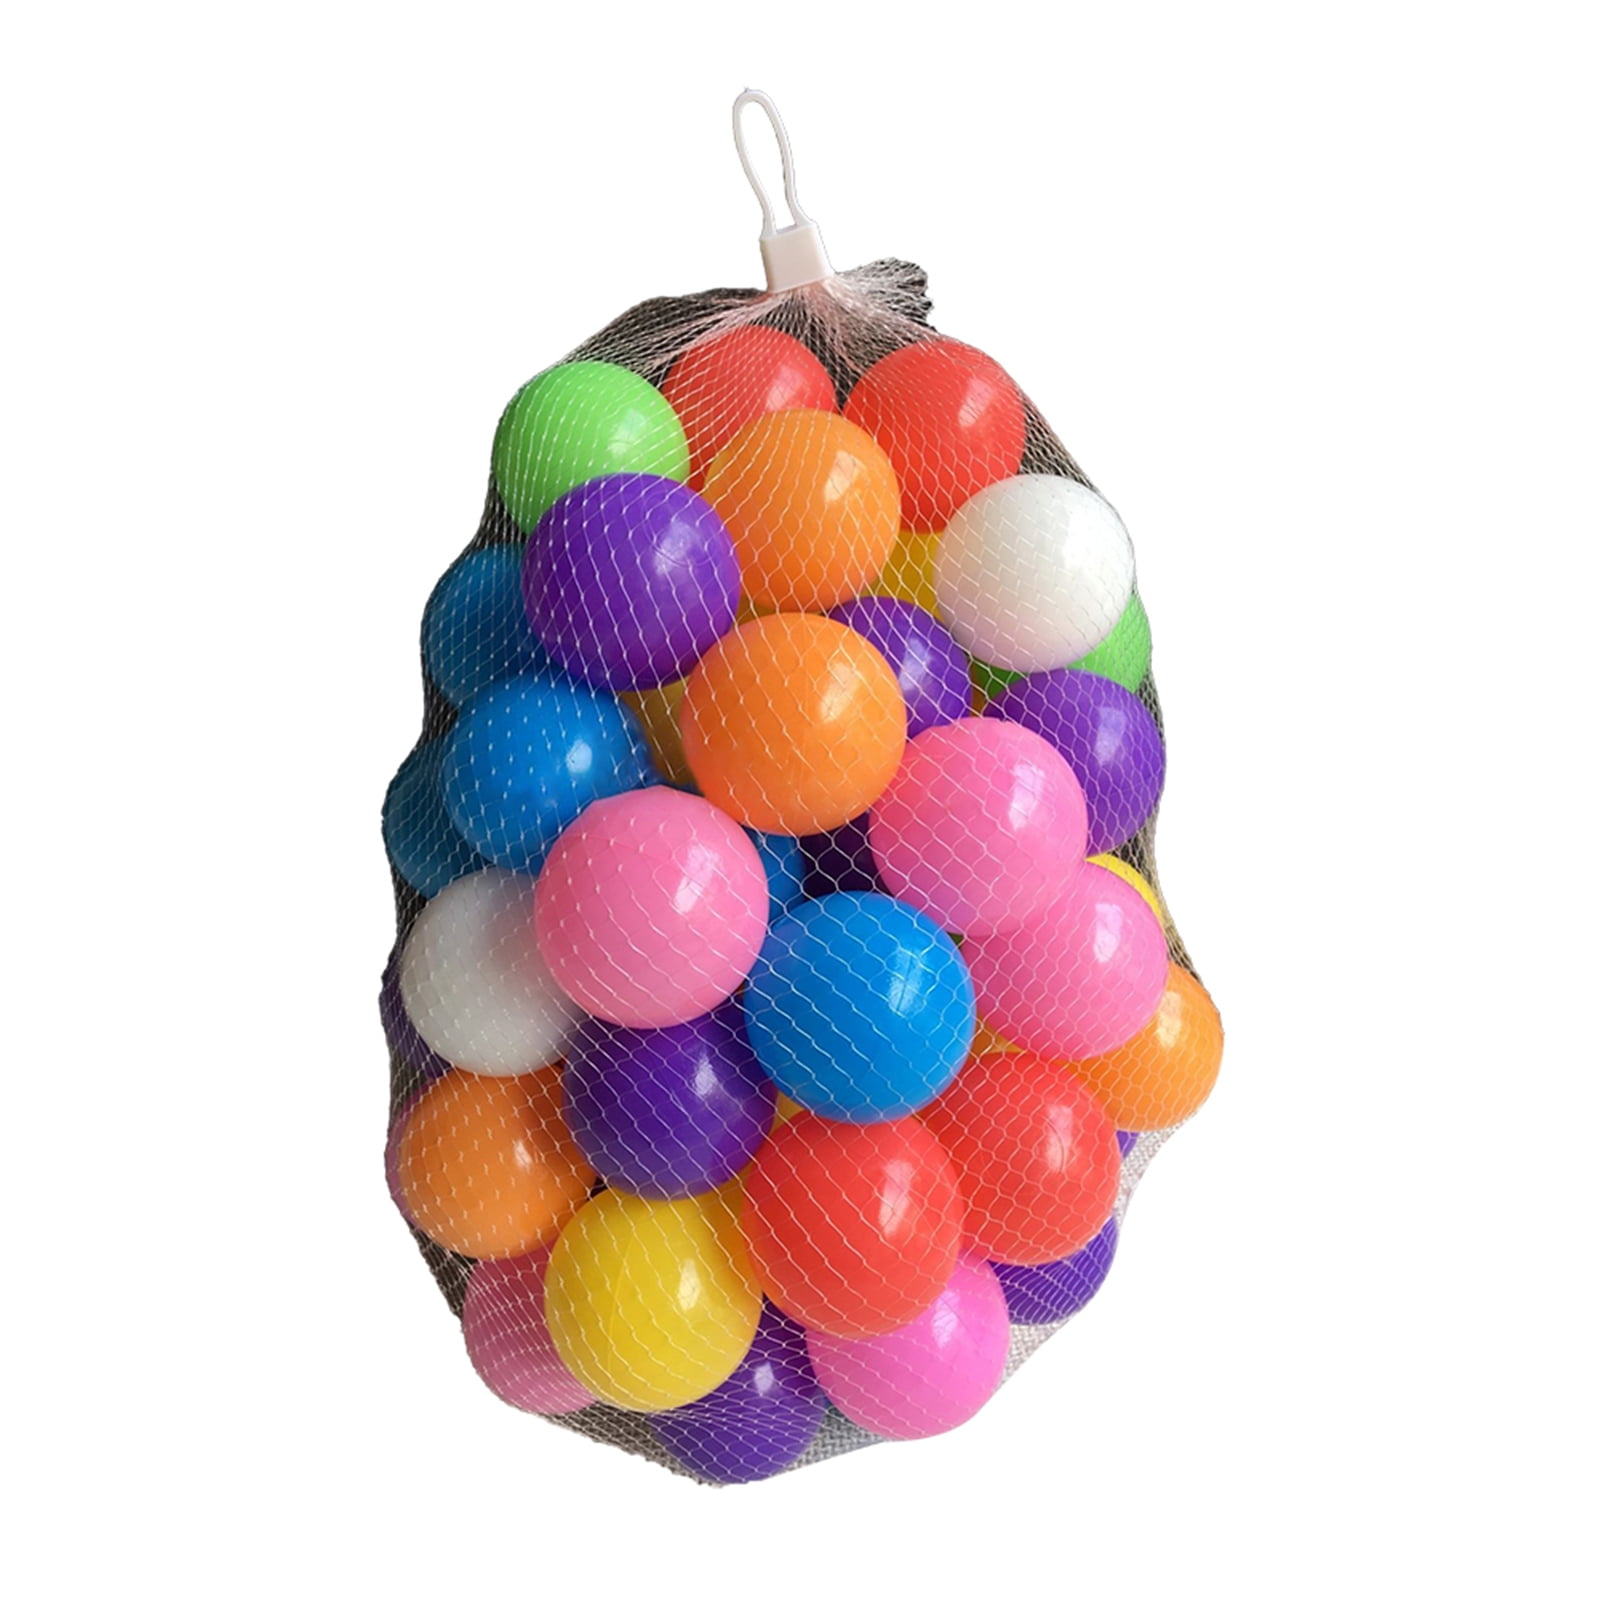 Details about   Plastic Play Balls Pit Balls Non-Toxic Outdoor Play Indoor Play For Girls Boys 